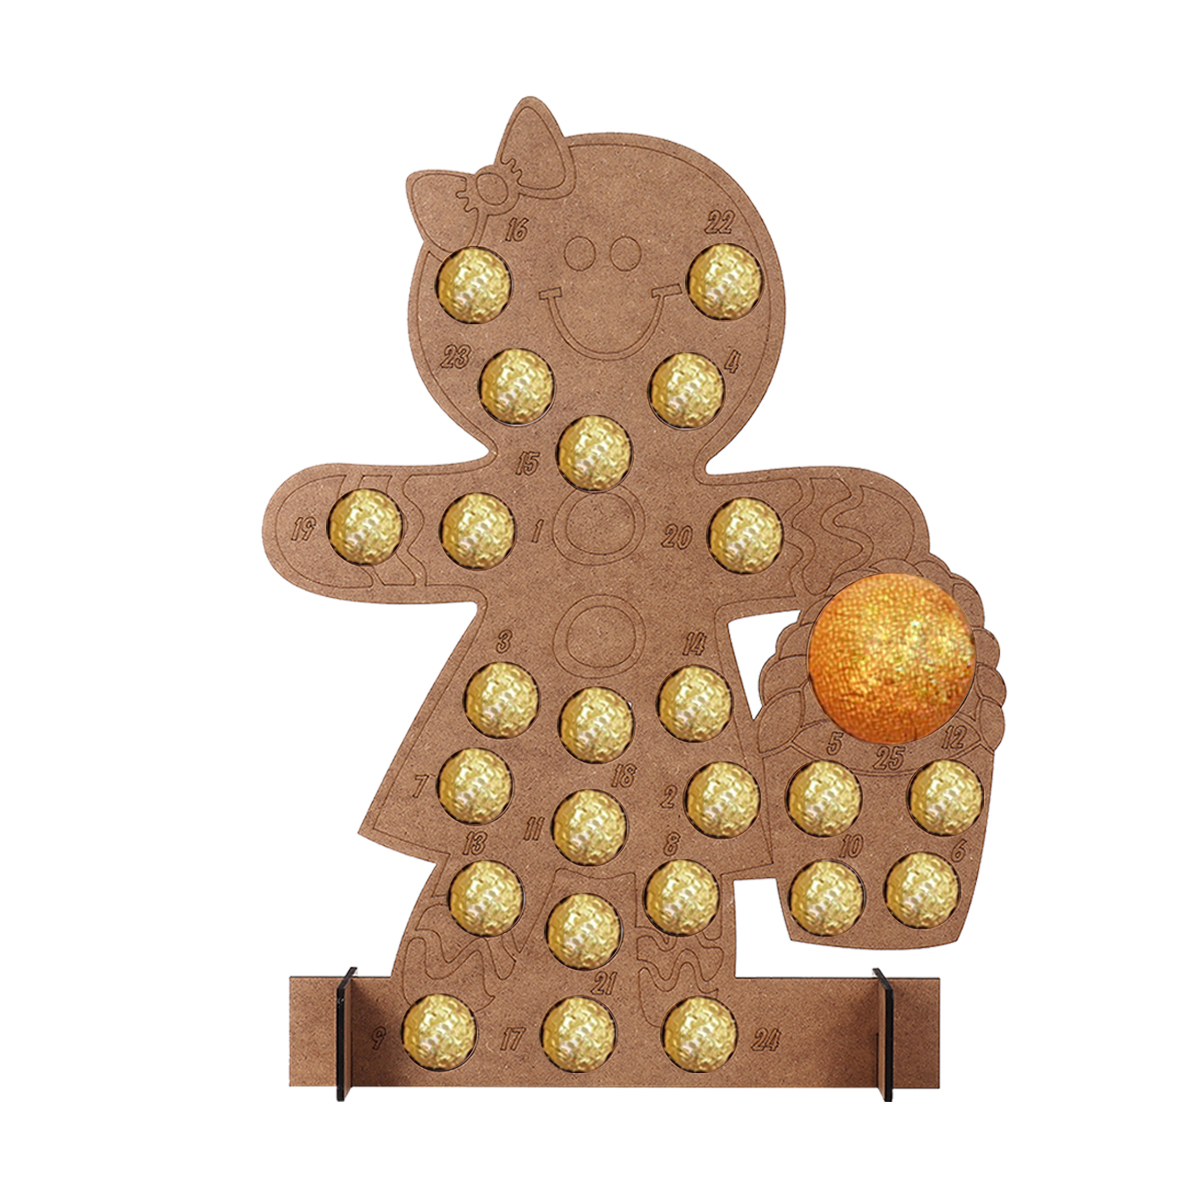 

Wooden Advent Calendar Gingerbread Lady Chocolates Storage Box Gift Christmas Decorations